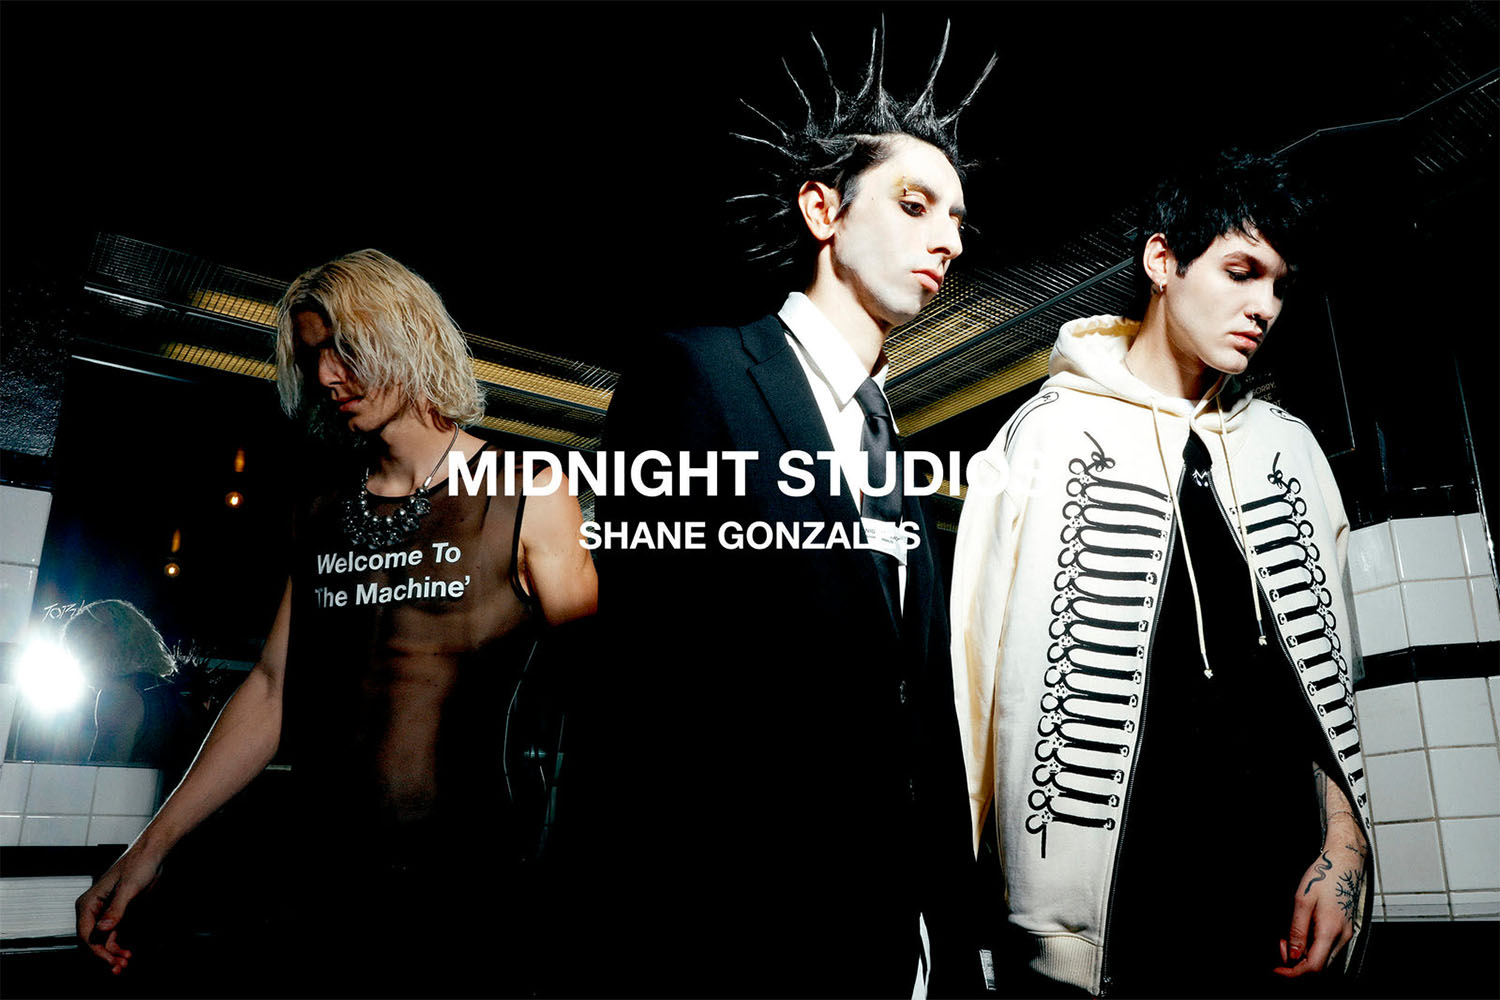 an image of three "punk" figures for midnight studios